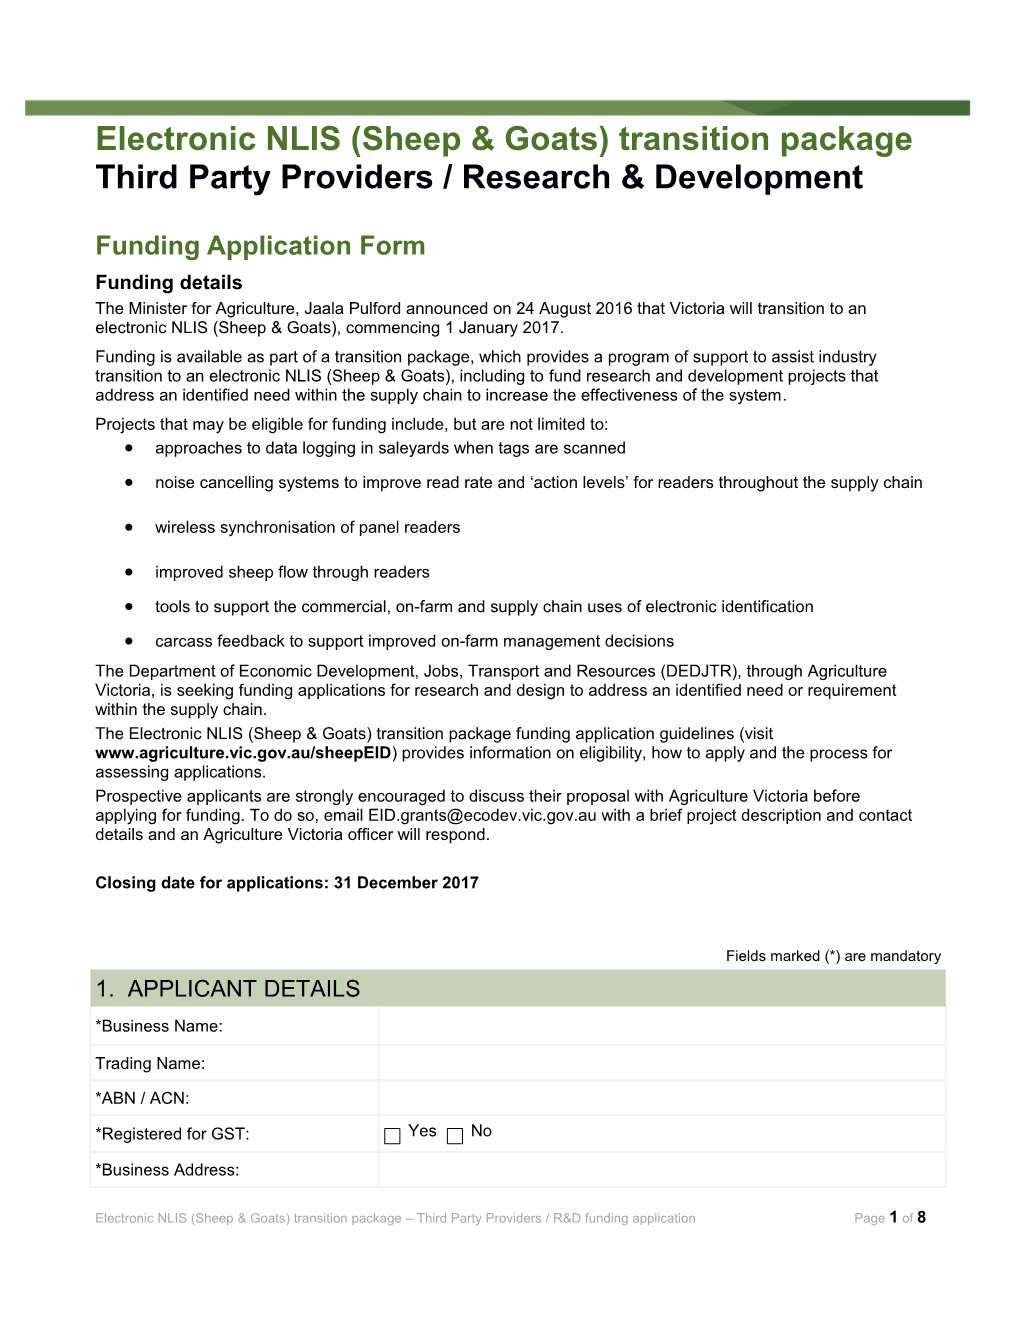 Electronicnlis (Sheep & Goats) Transition Package Third Party Providers / Research